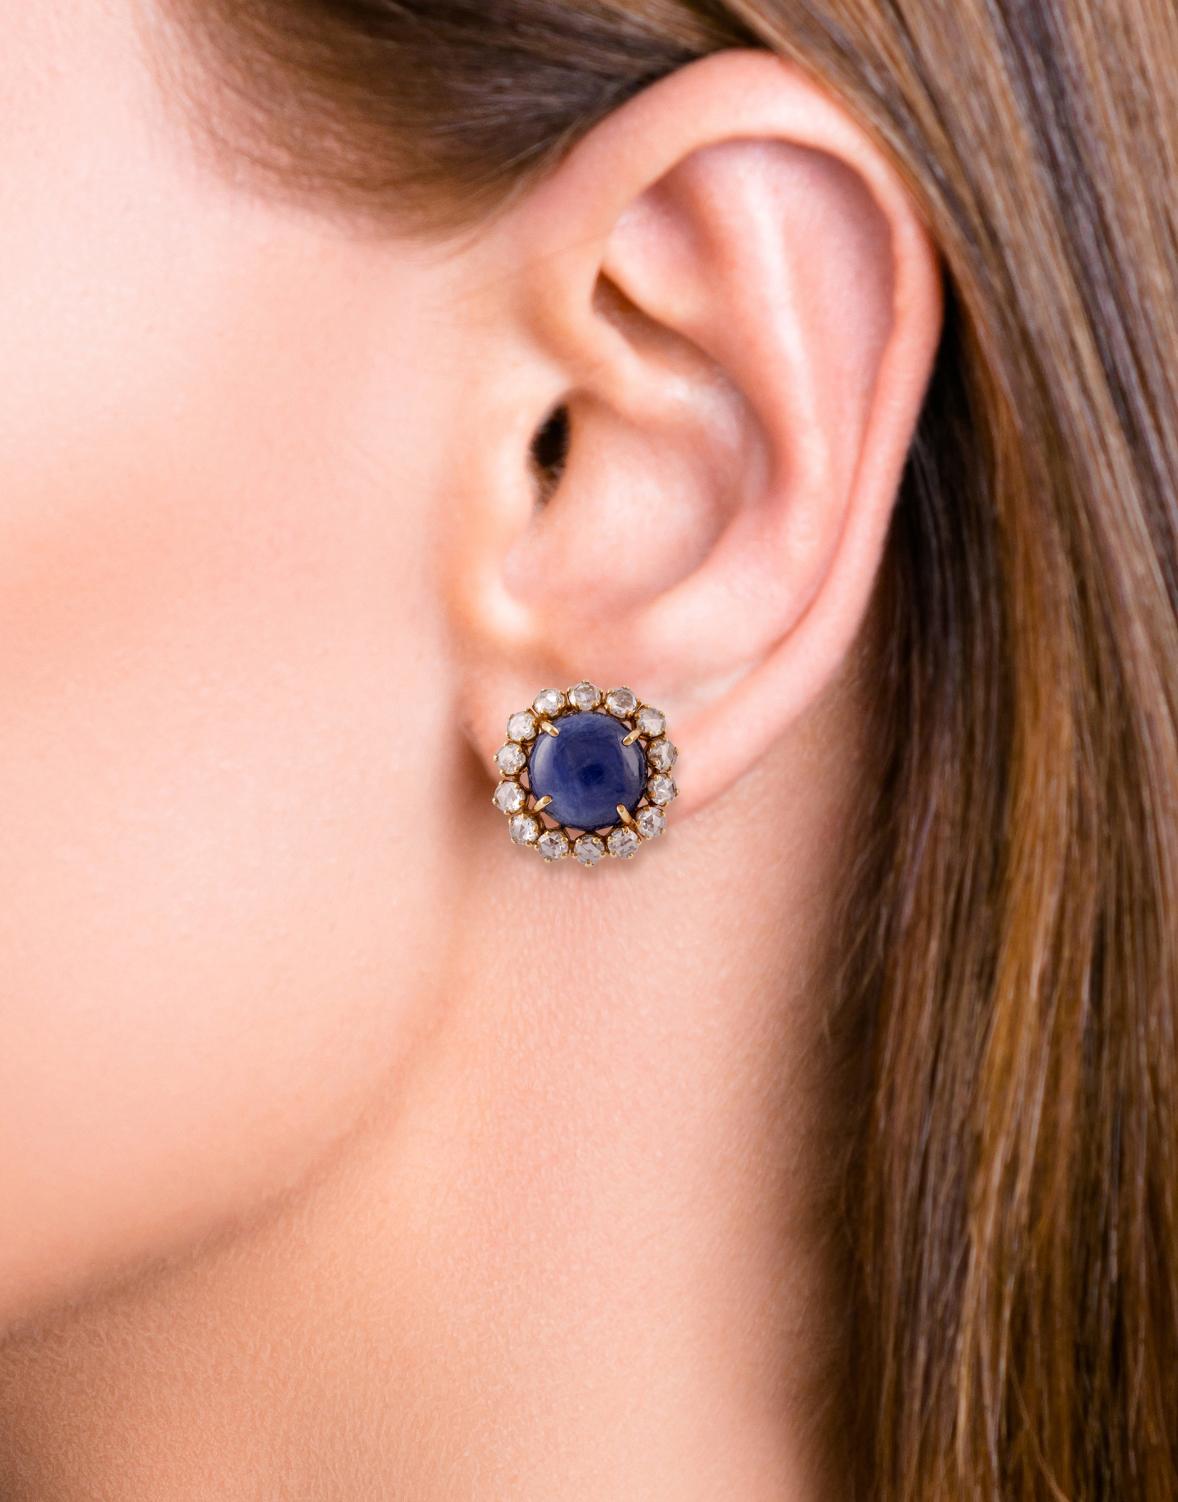 Cabochon 18.29 Carat Natural Sapphire & Diamond Cluster Earring in 18K gold For Sale